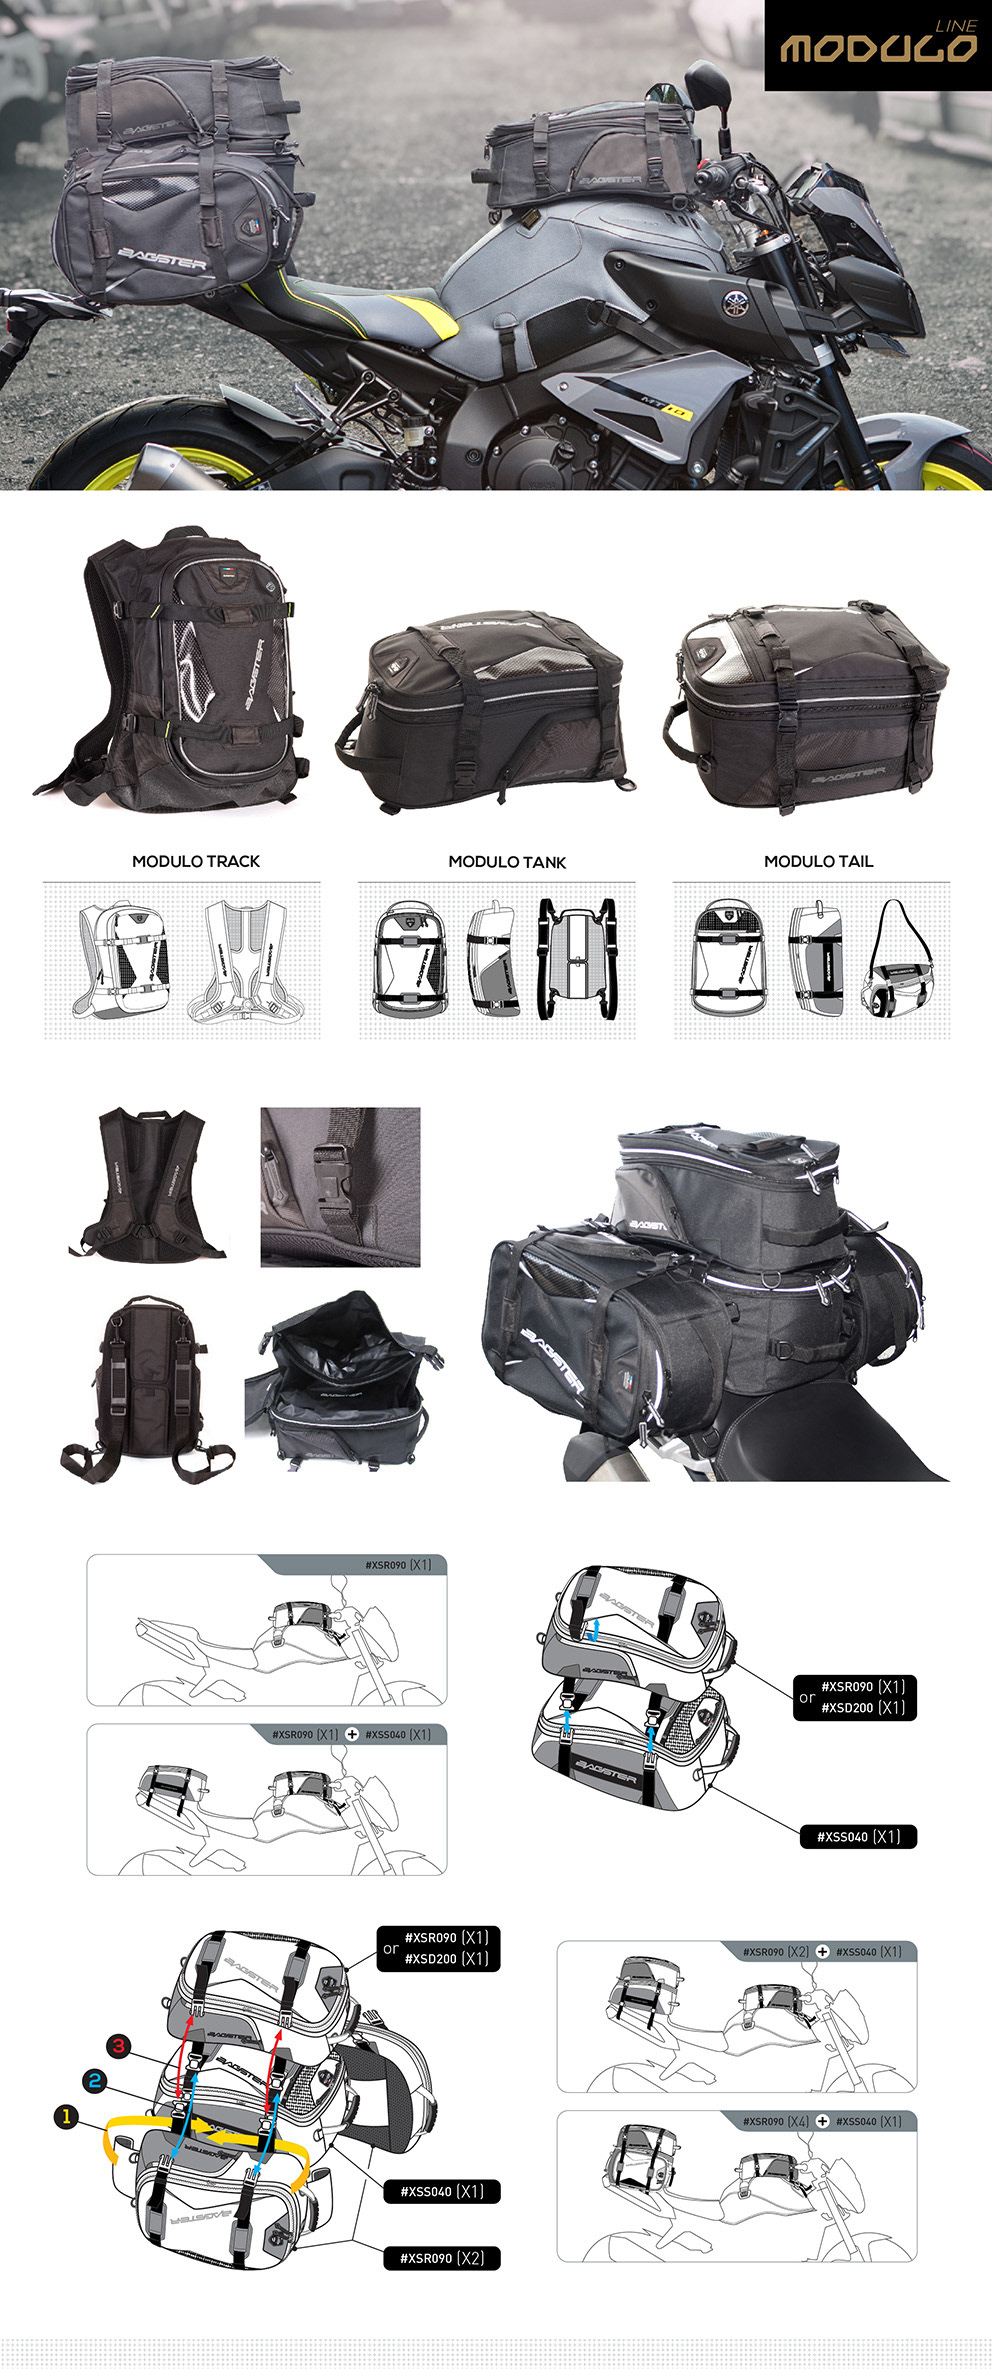 design conception luggage backpack rear luggage tank luggage product line explanatory illustration logo identity attach system